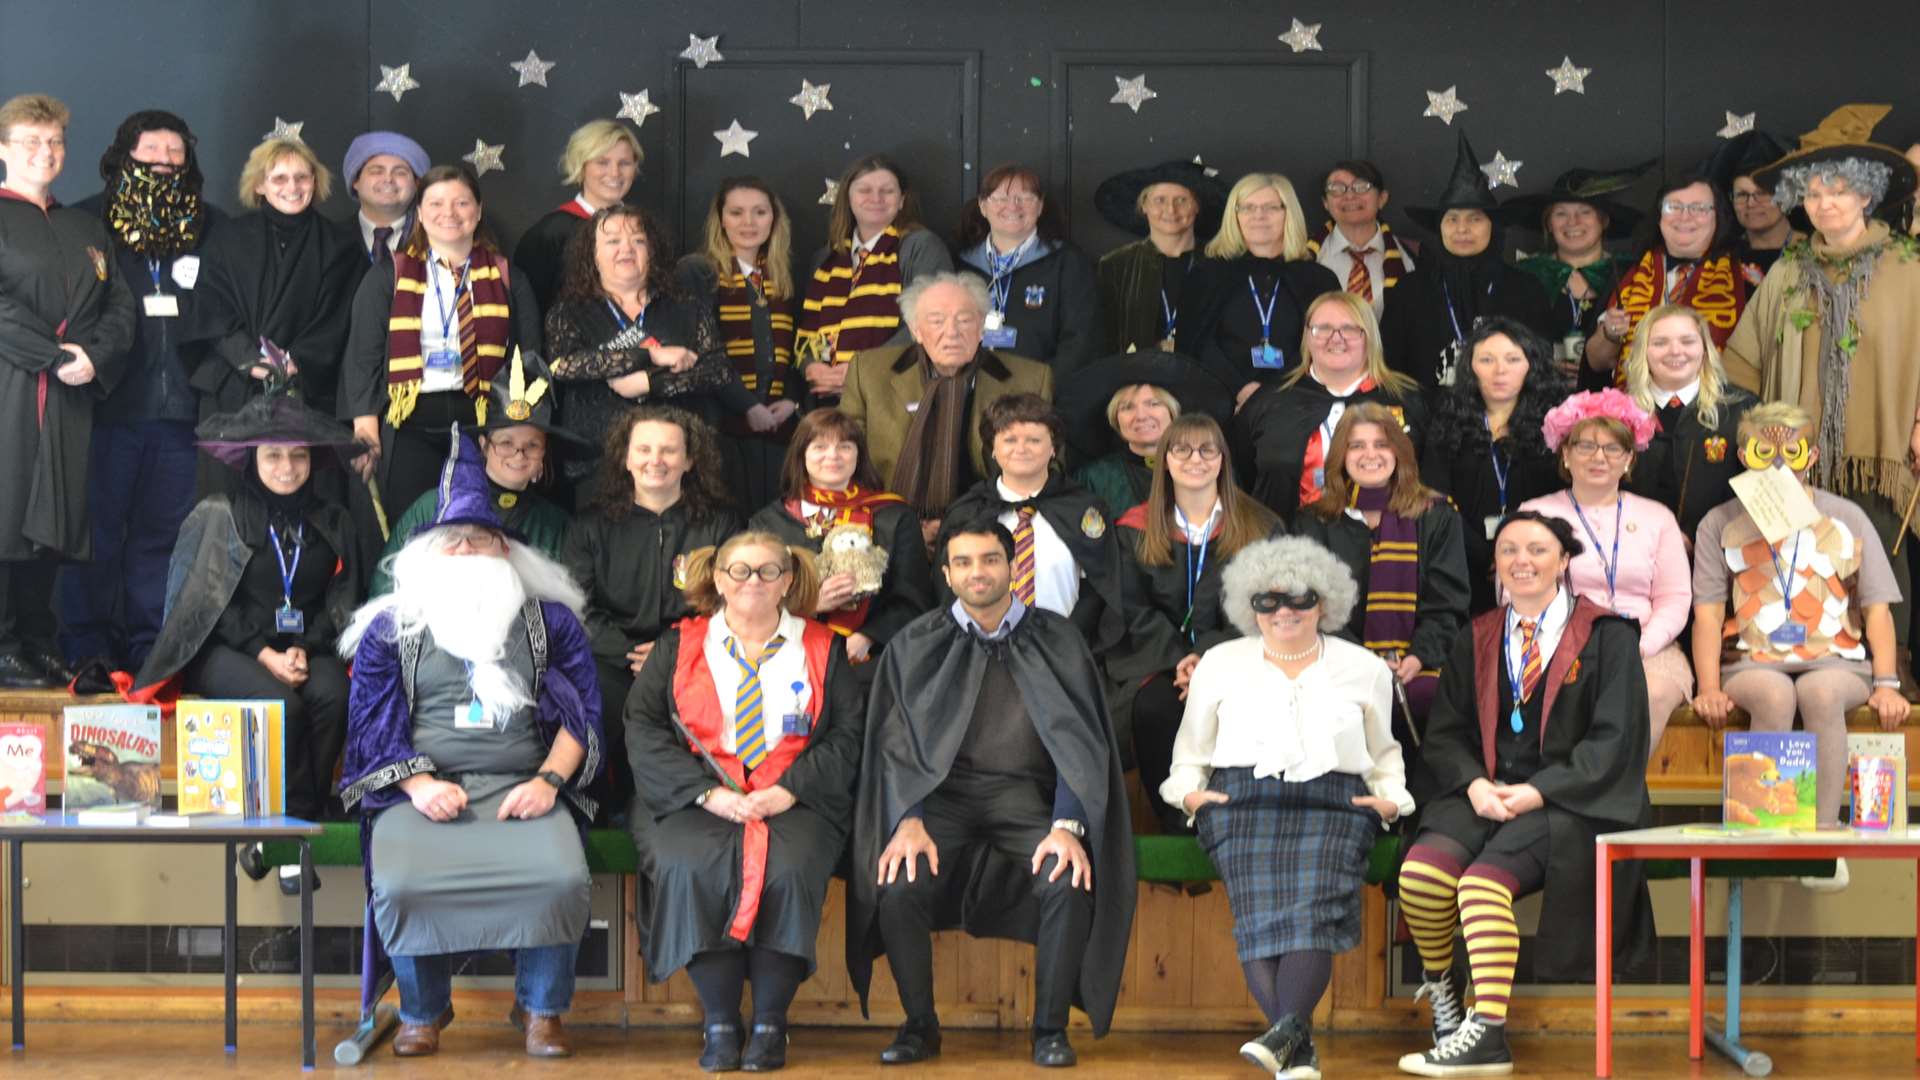 Staff knew who their special guest was going to be so dressed as Harry Potter characters. Picture: Shears Green Junior School